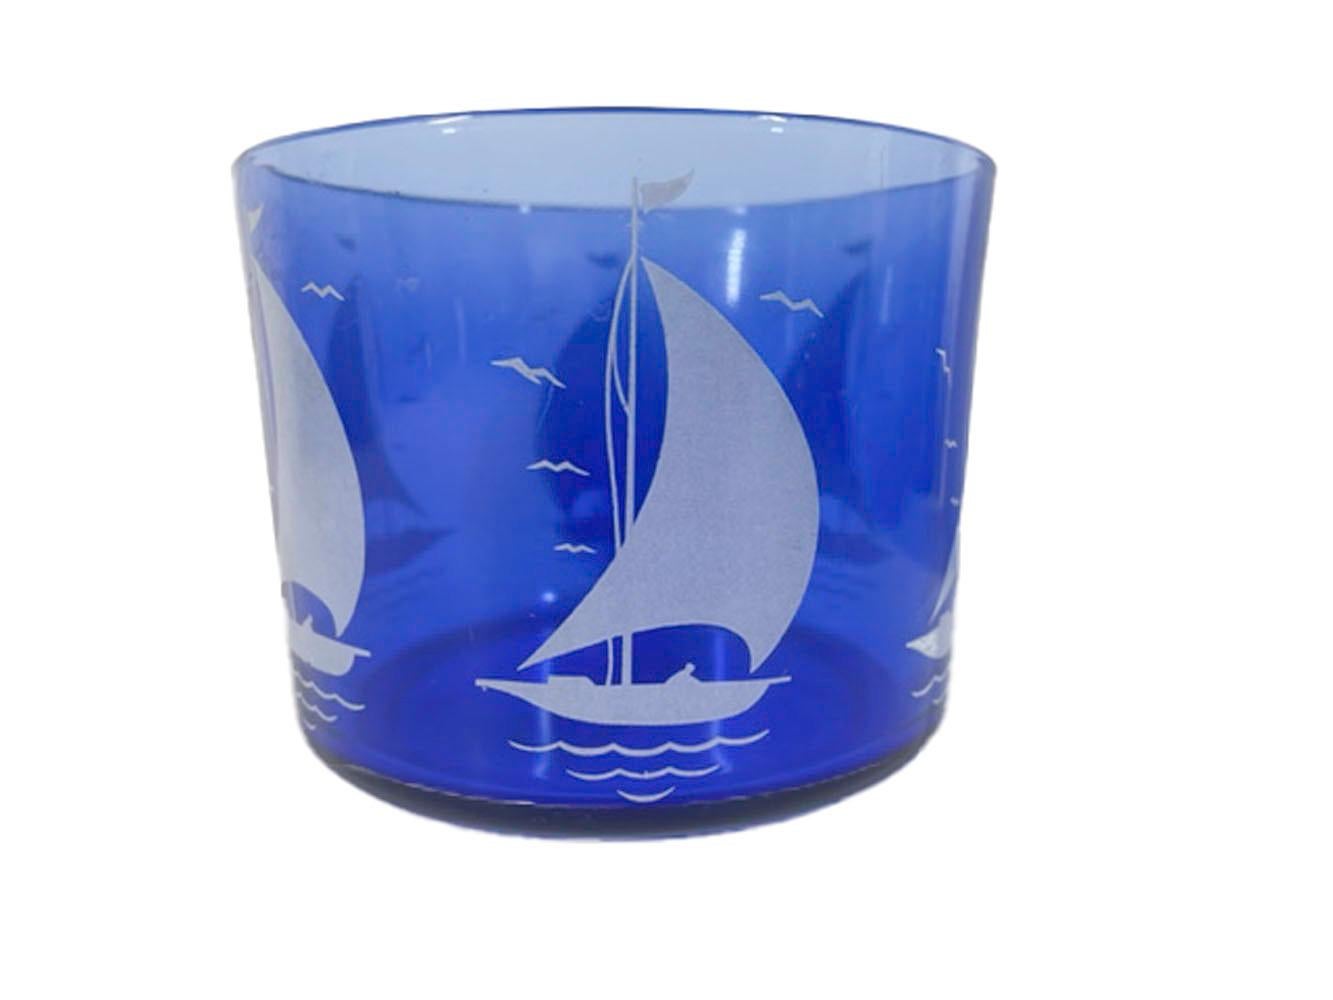 Art Deco cocktail shaker by Hazel-Atlas for their Sportsman Series line. Each piece in cobalt blue glass with white sailboats, the set consisting of a chrome lidded cocktail shaker, an ice bowl and 6 tumblers.